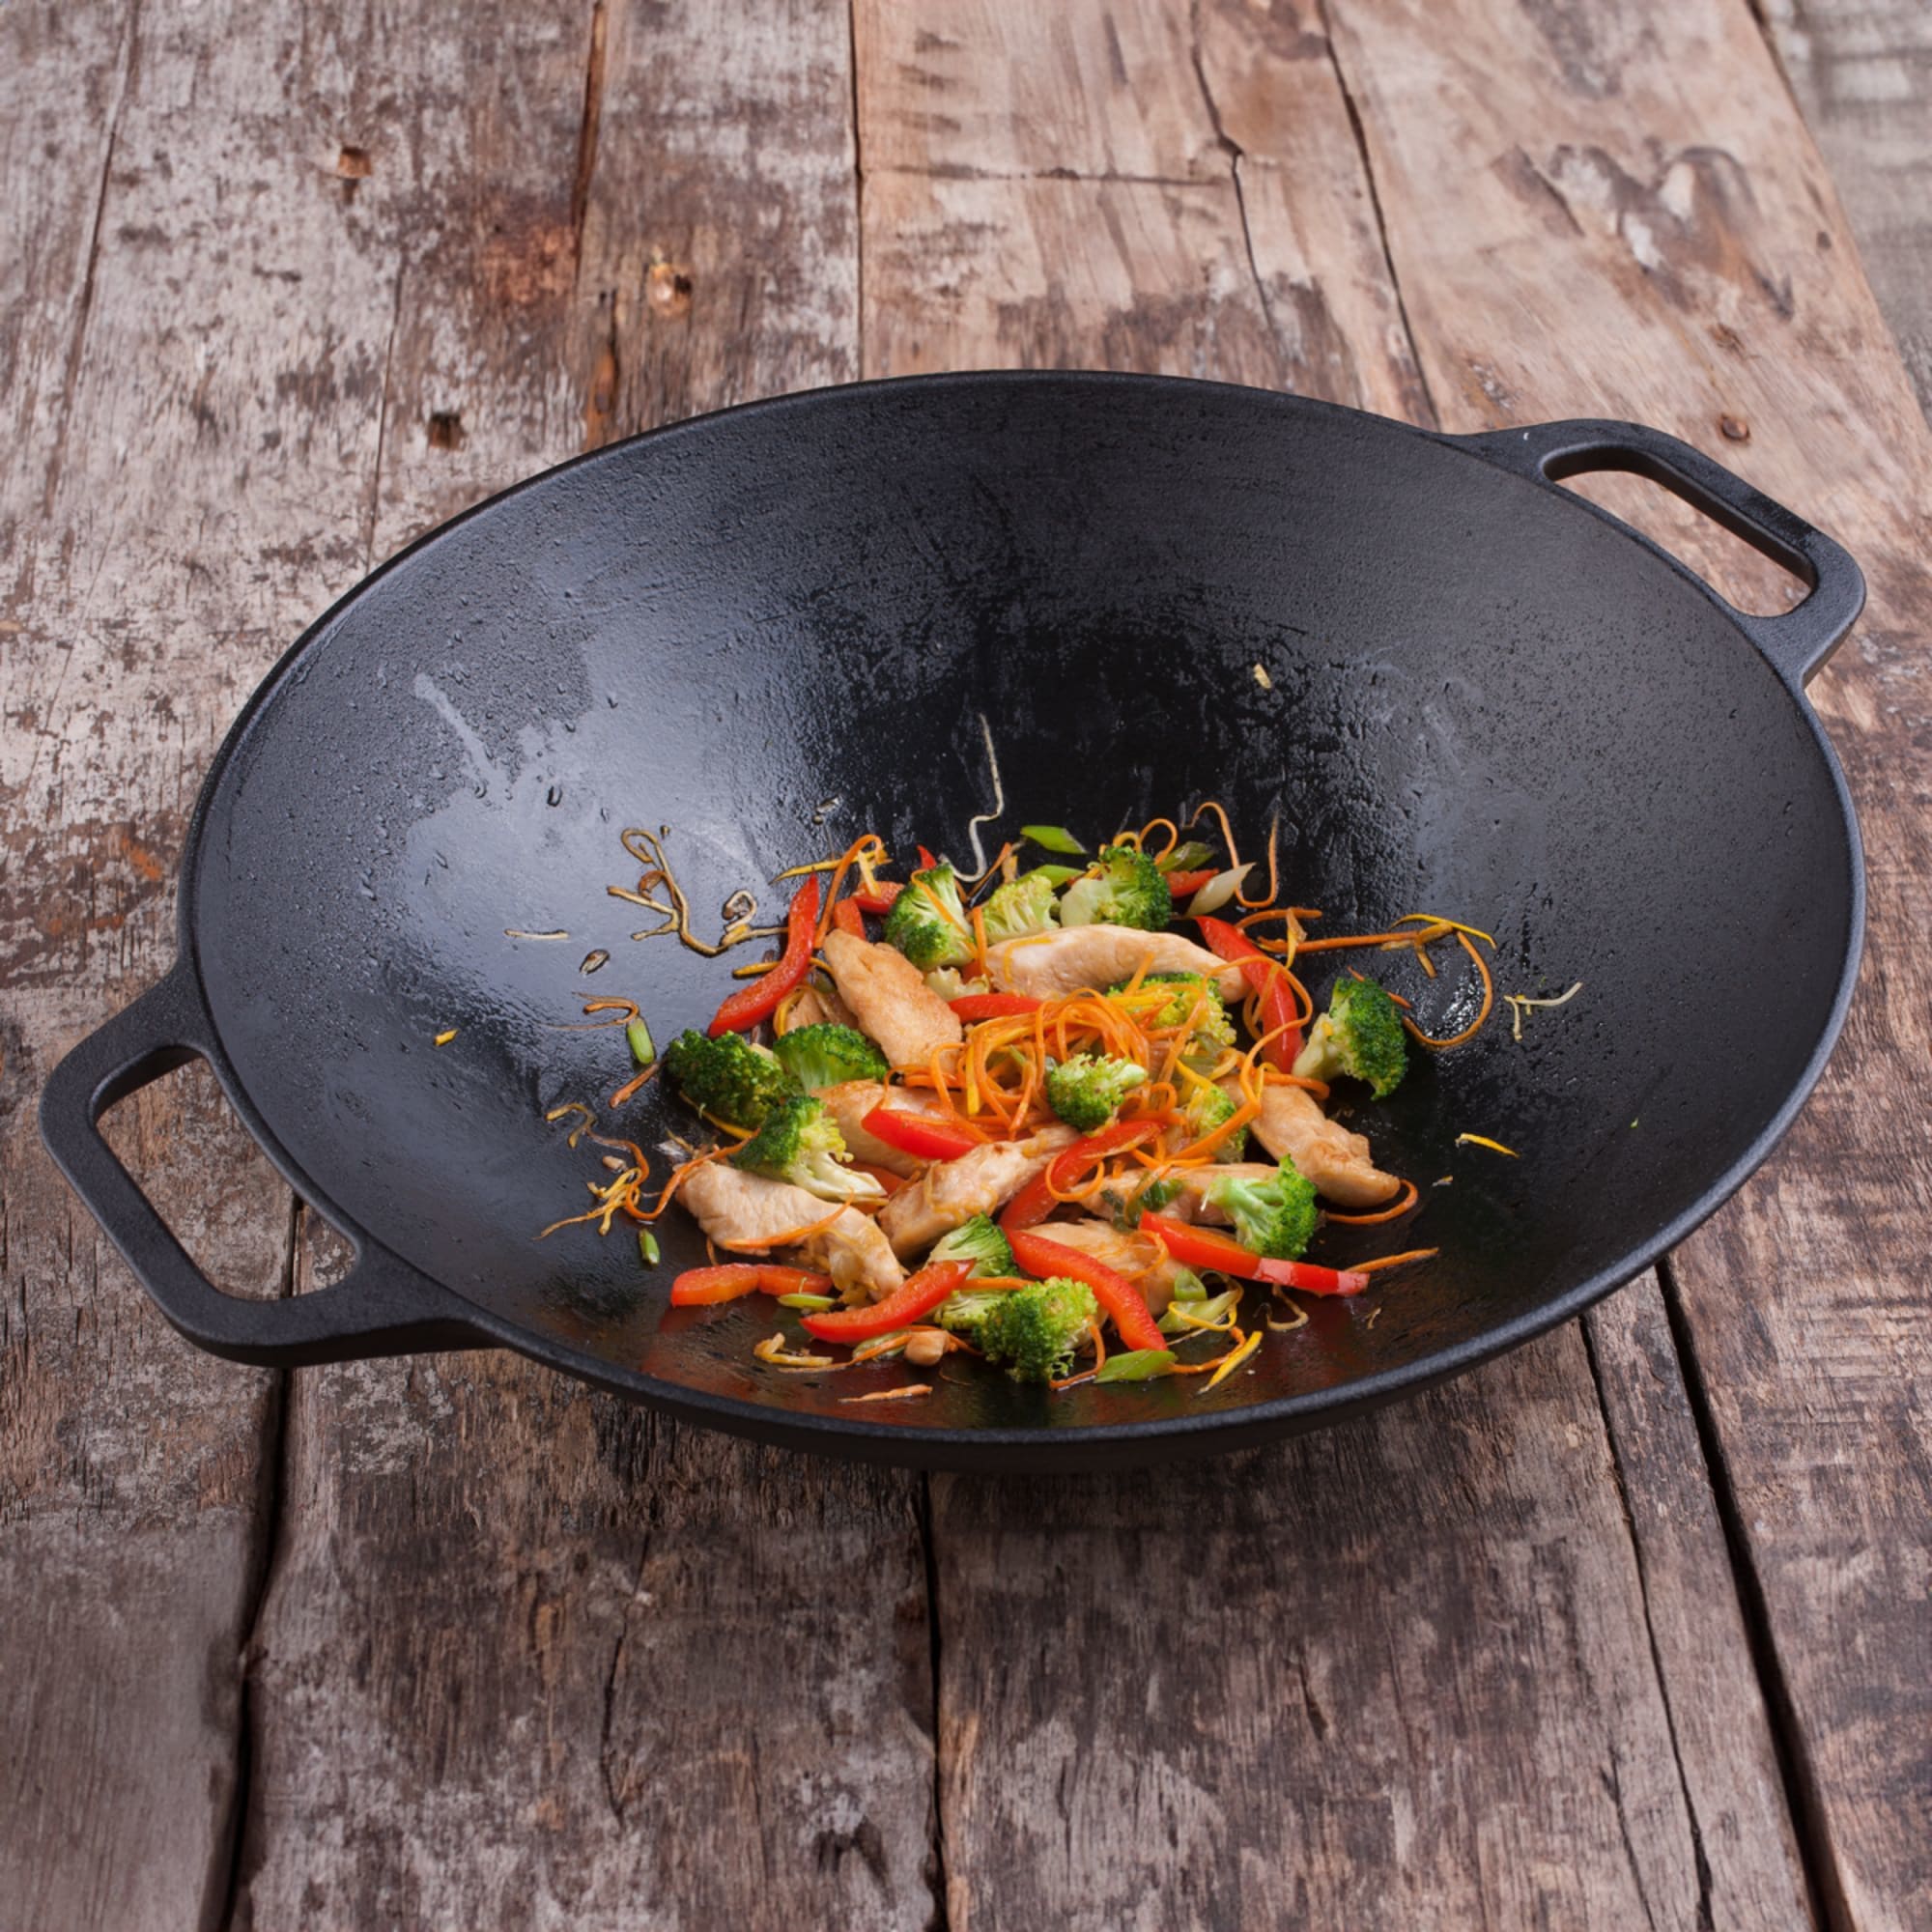 https://res.cloudinary.com/kitchenwarehouse/image/upload/c_fill,g_face,w_1250/f_auto/t_PDP_2000x2000/Supplier%20Images%20/2000px/Victoria-Lifestyle-Wok-35cm-2_2000px.jpg?imagetype=pdp_full